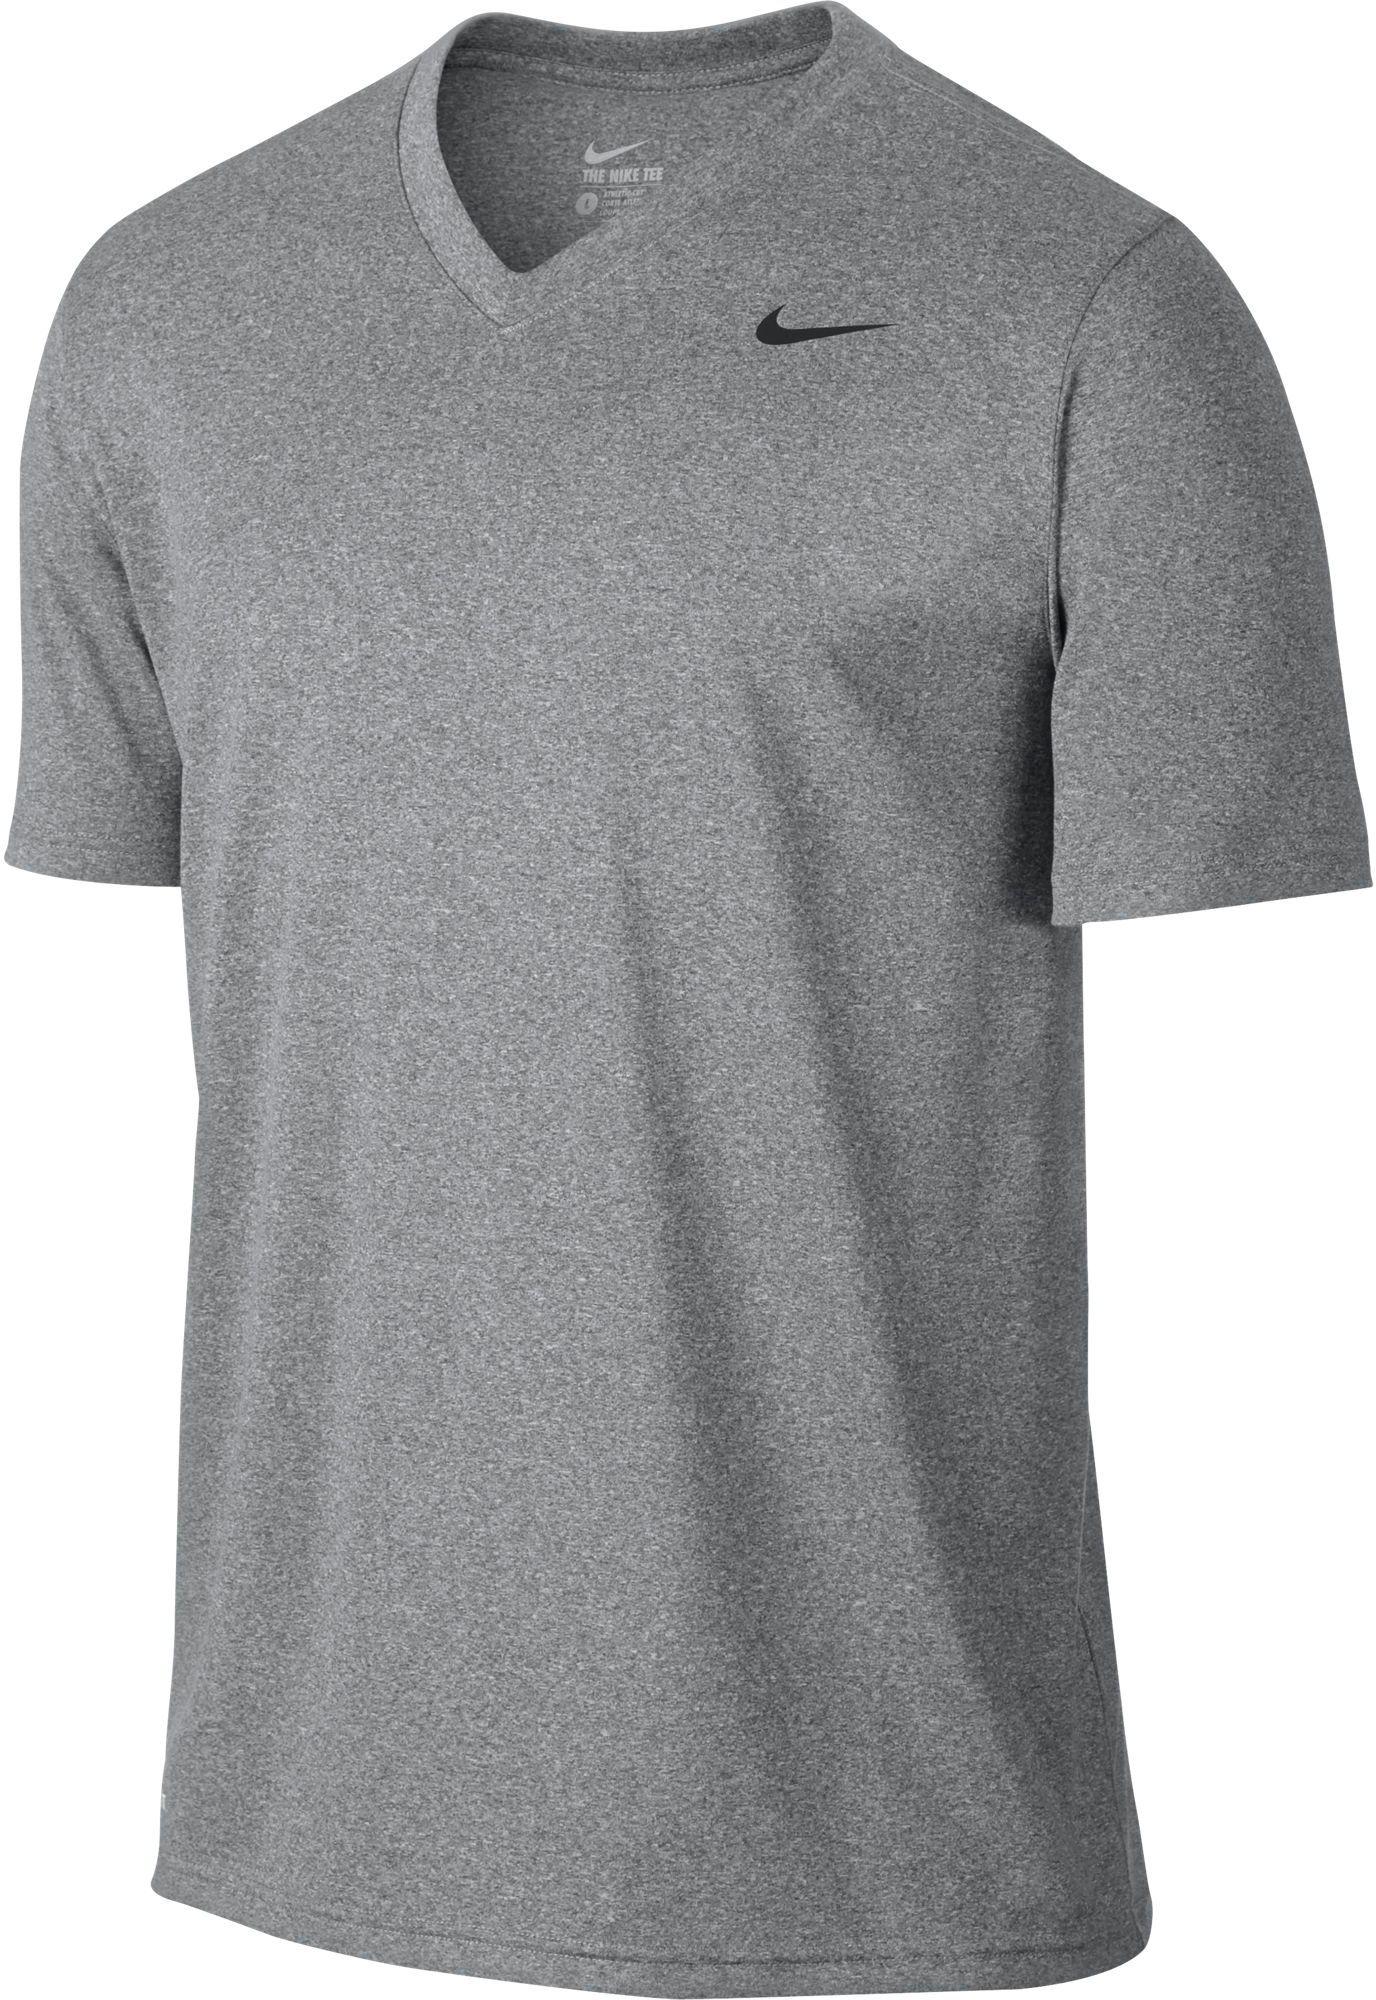 Nike Synthetic Legend 2.0 V-neck T-shirt in Carbon Heather (Gray) for ...